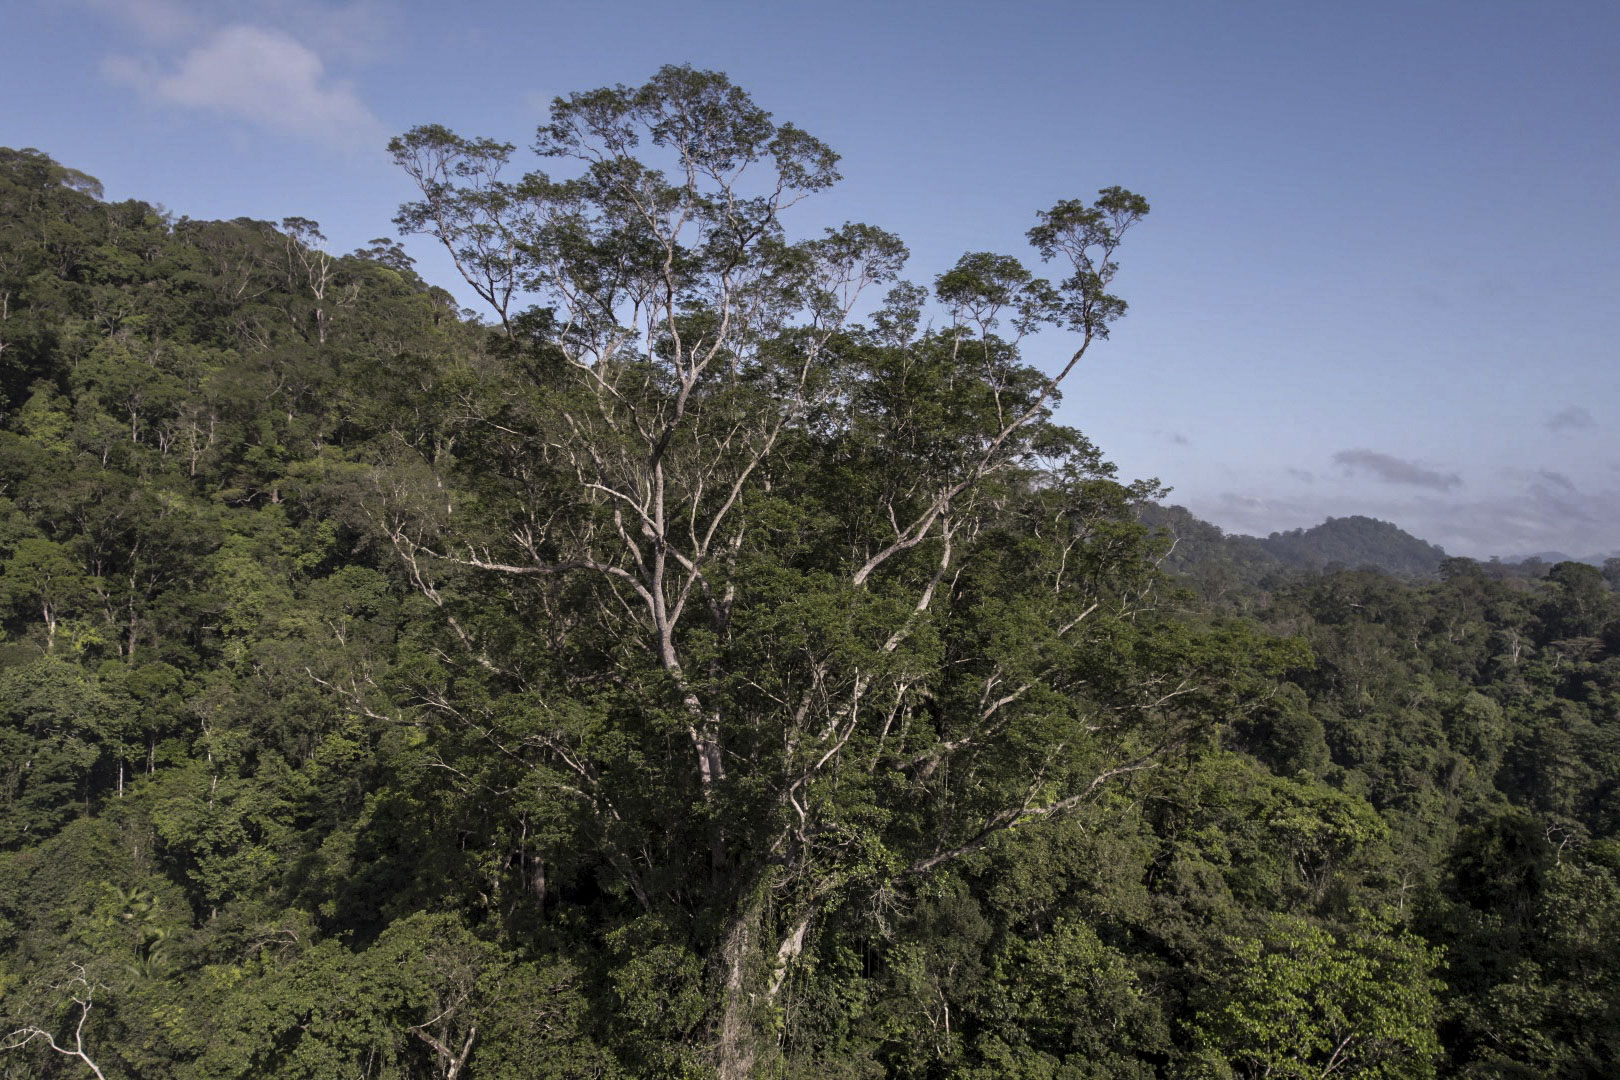 After three years of planning, five expeditions and a two-week trek through dense jungle, scientists have reached the tallest tree ever found in the Amazon rainforest, a towering specimen the size of a 25-storey building.